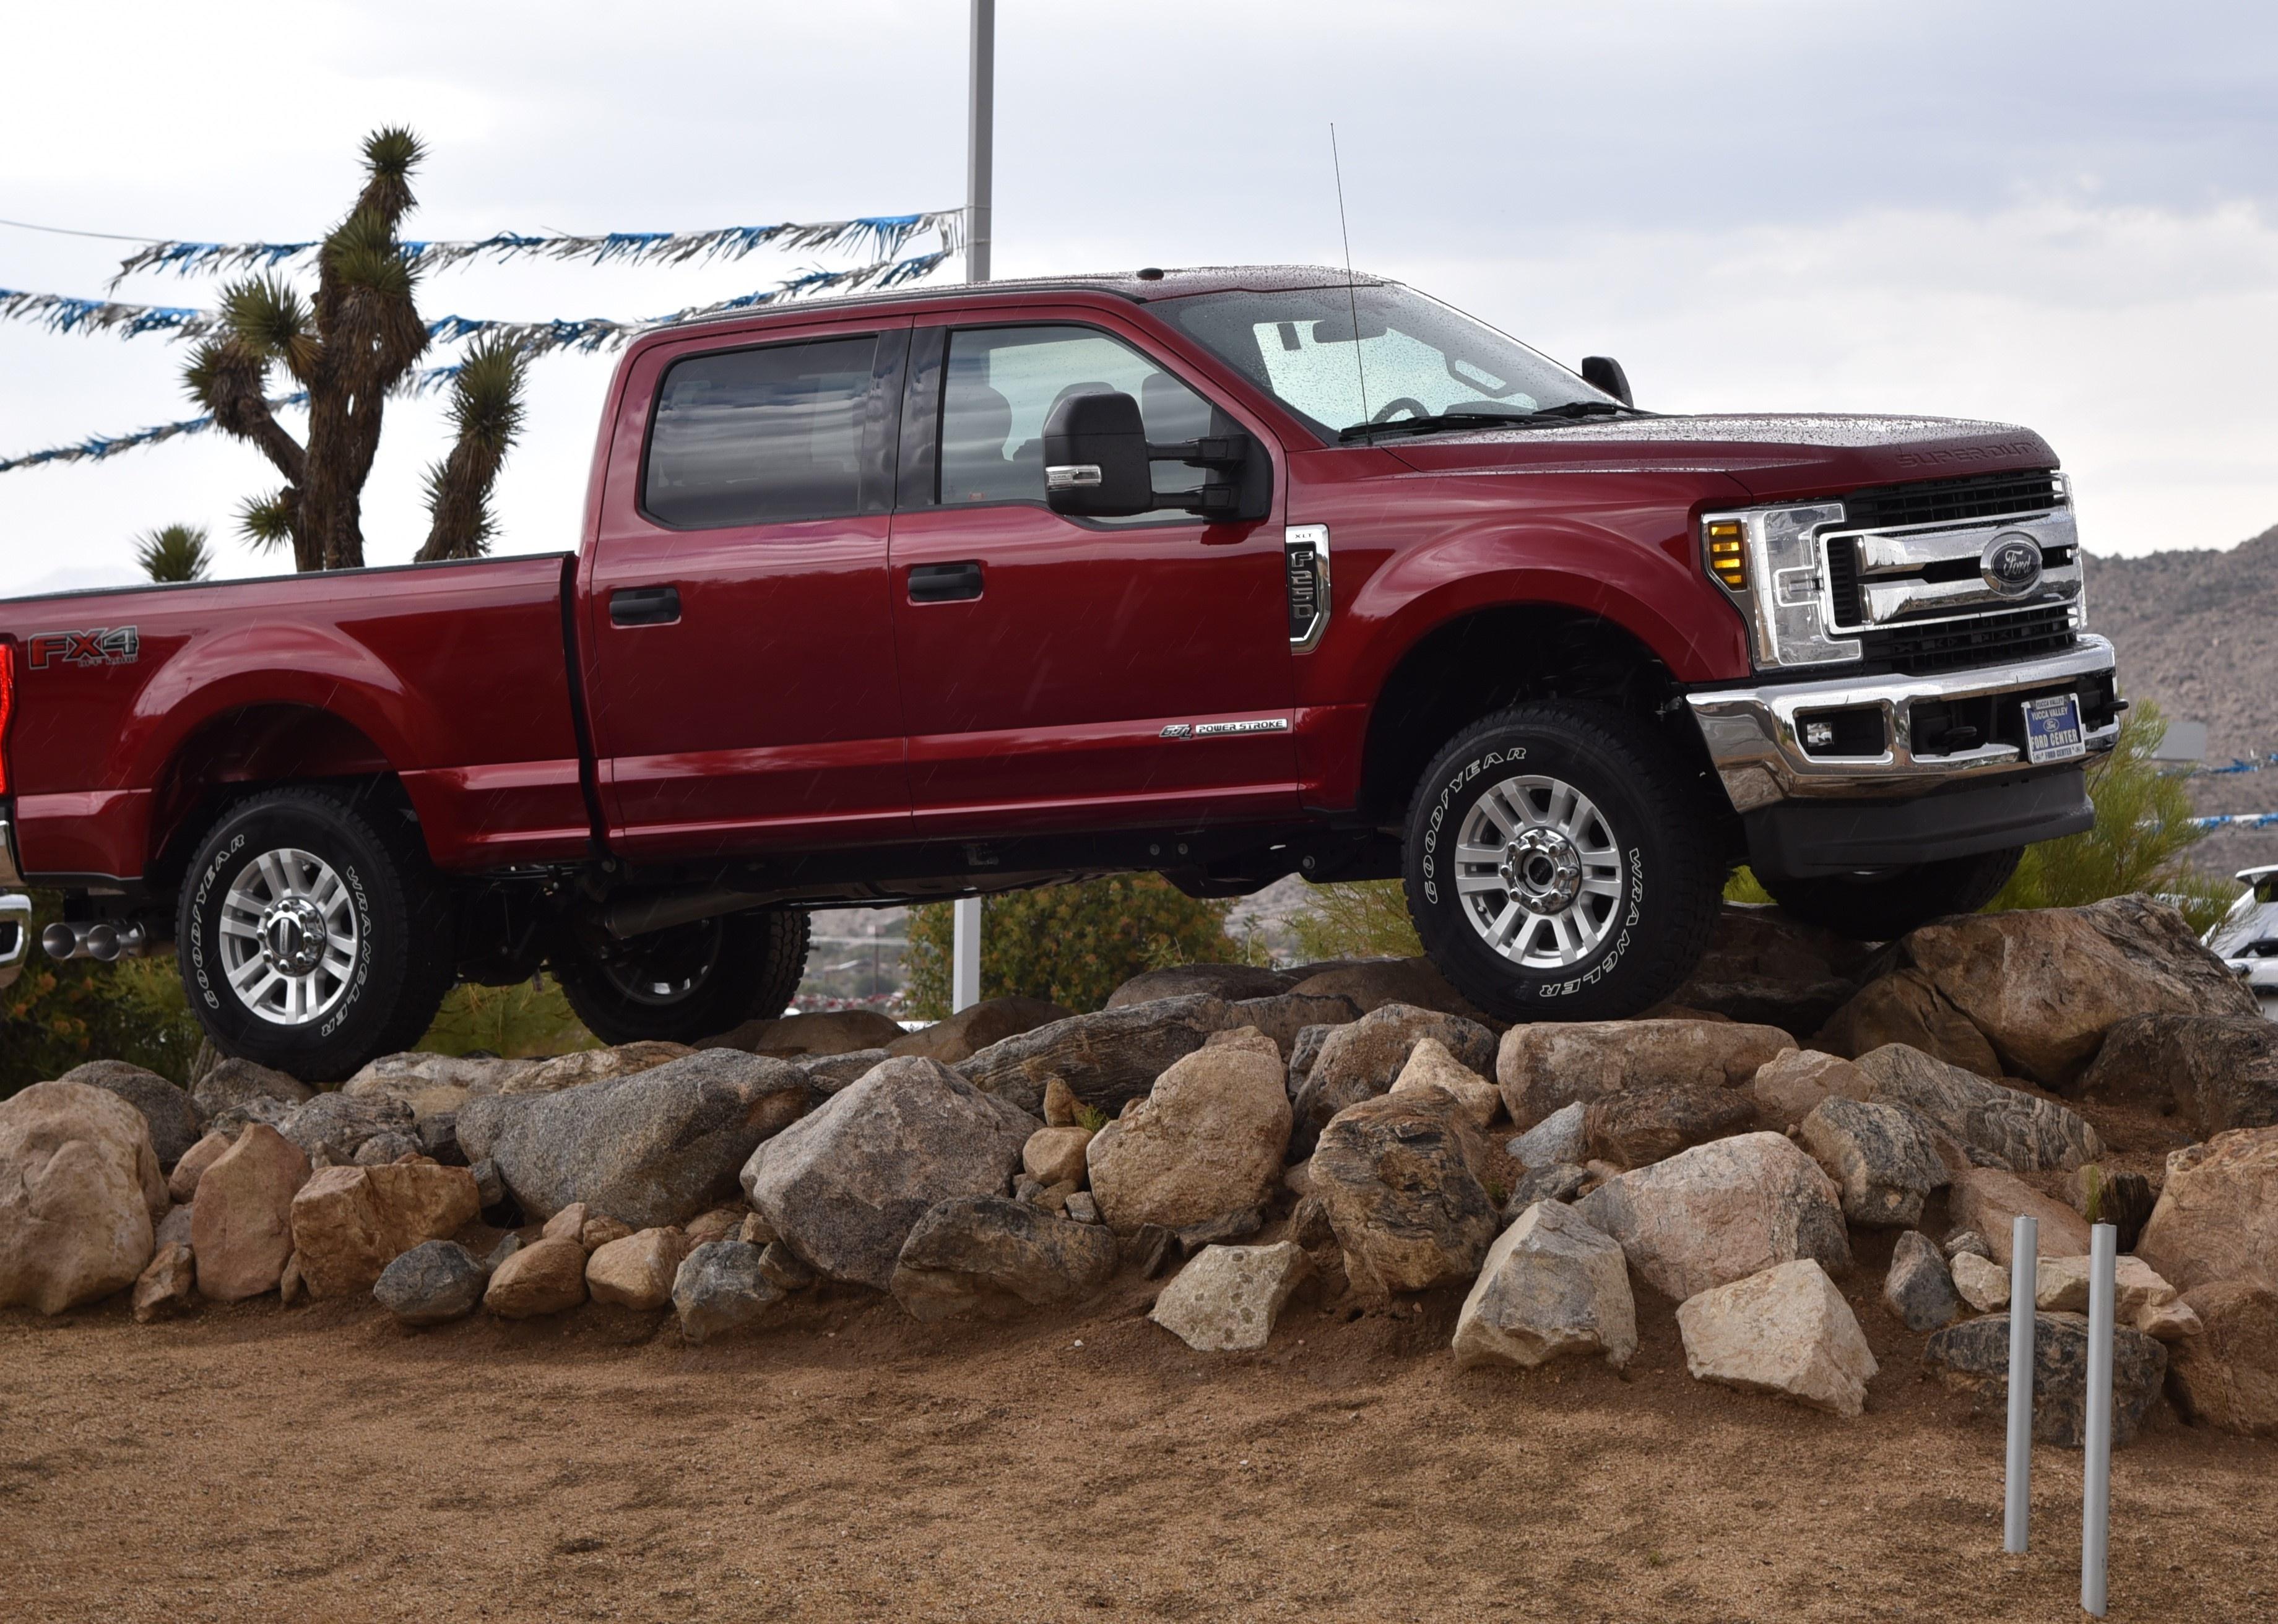 New red Ford F150 at a dealership on some rocks.